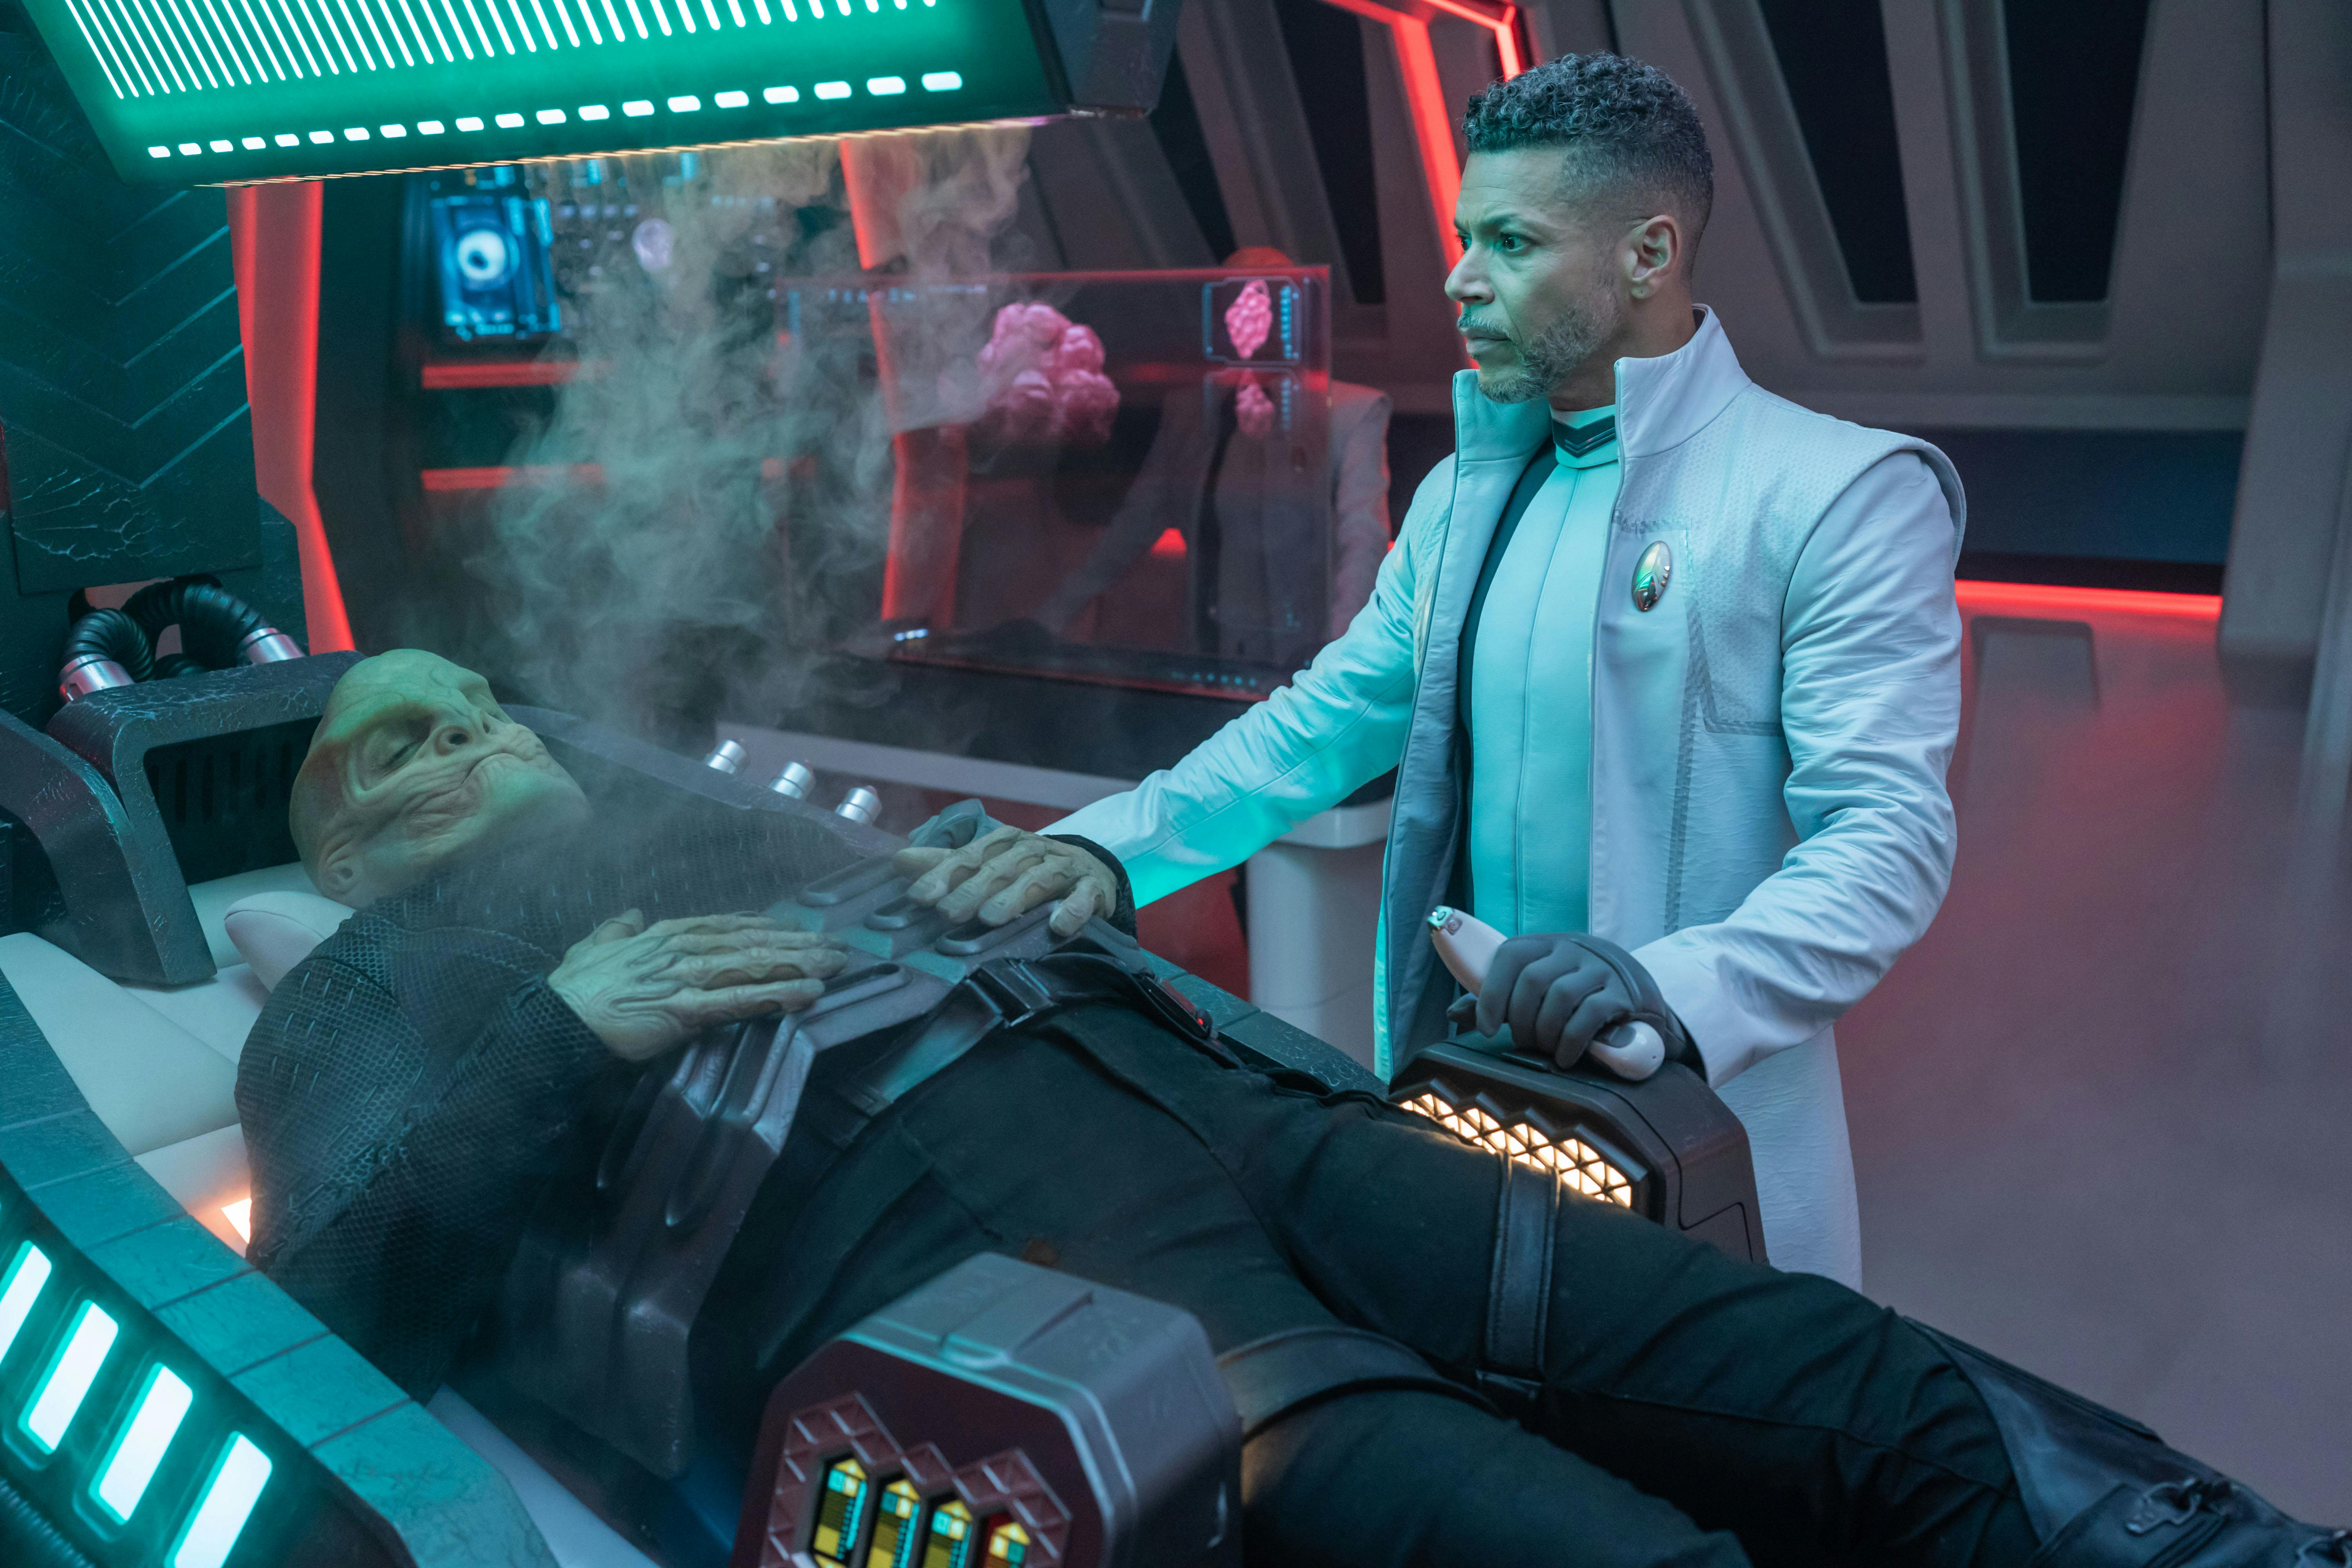 In Discovery's sickbay, Dr. Culber monitors the gravely injured L'ak's condition in 'Erigah'